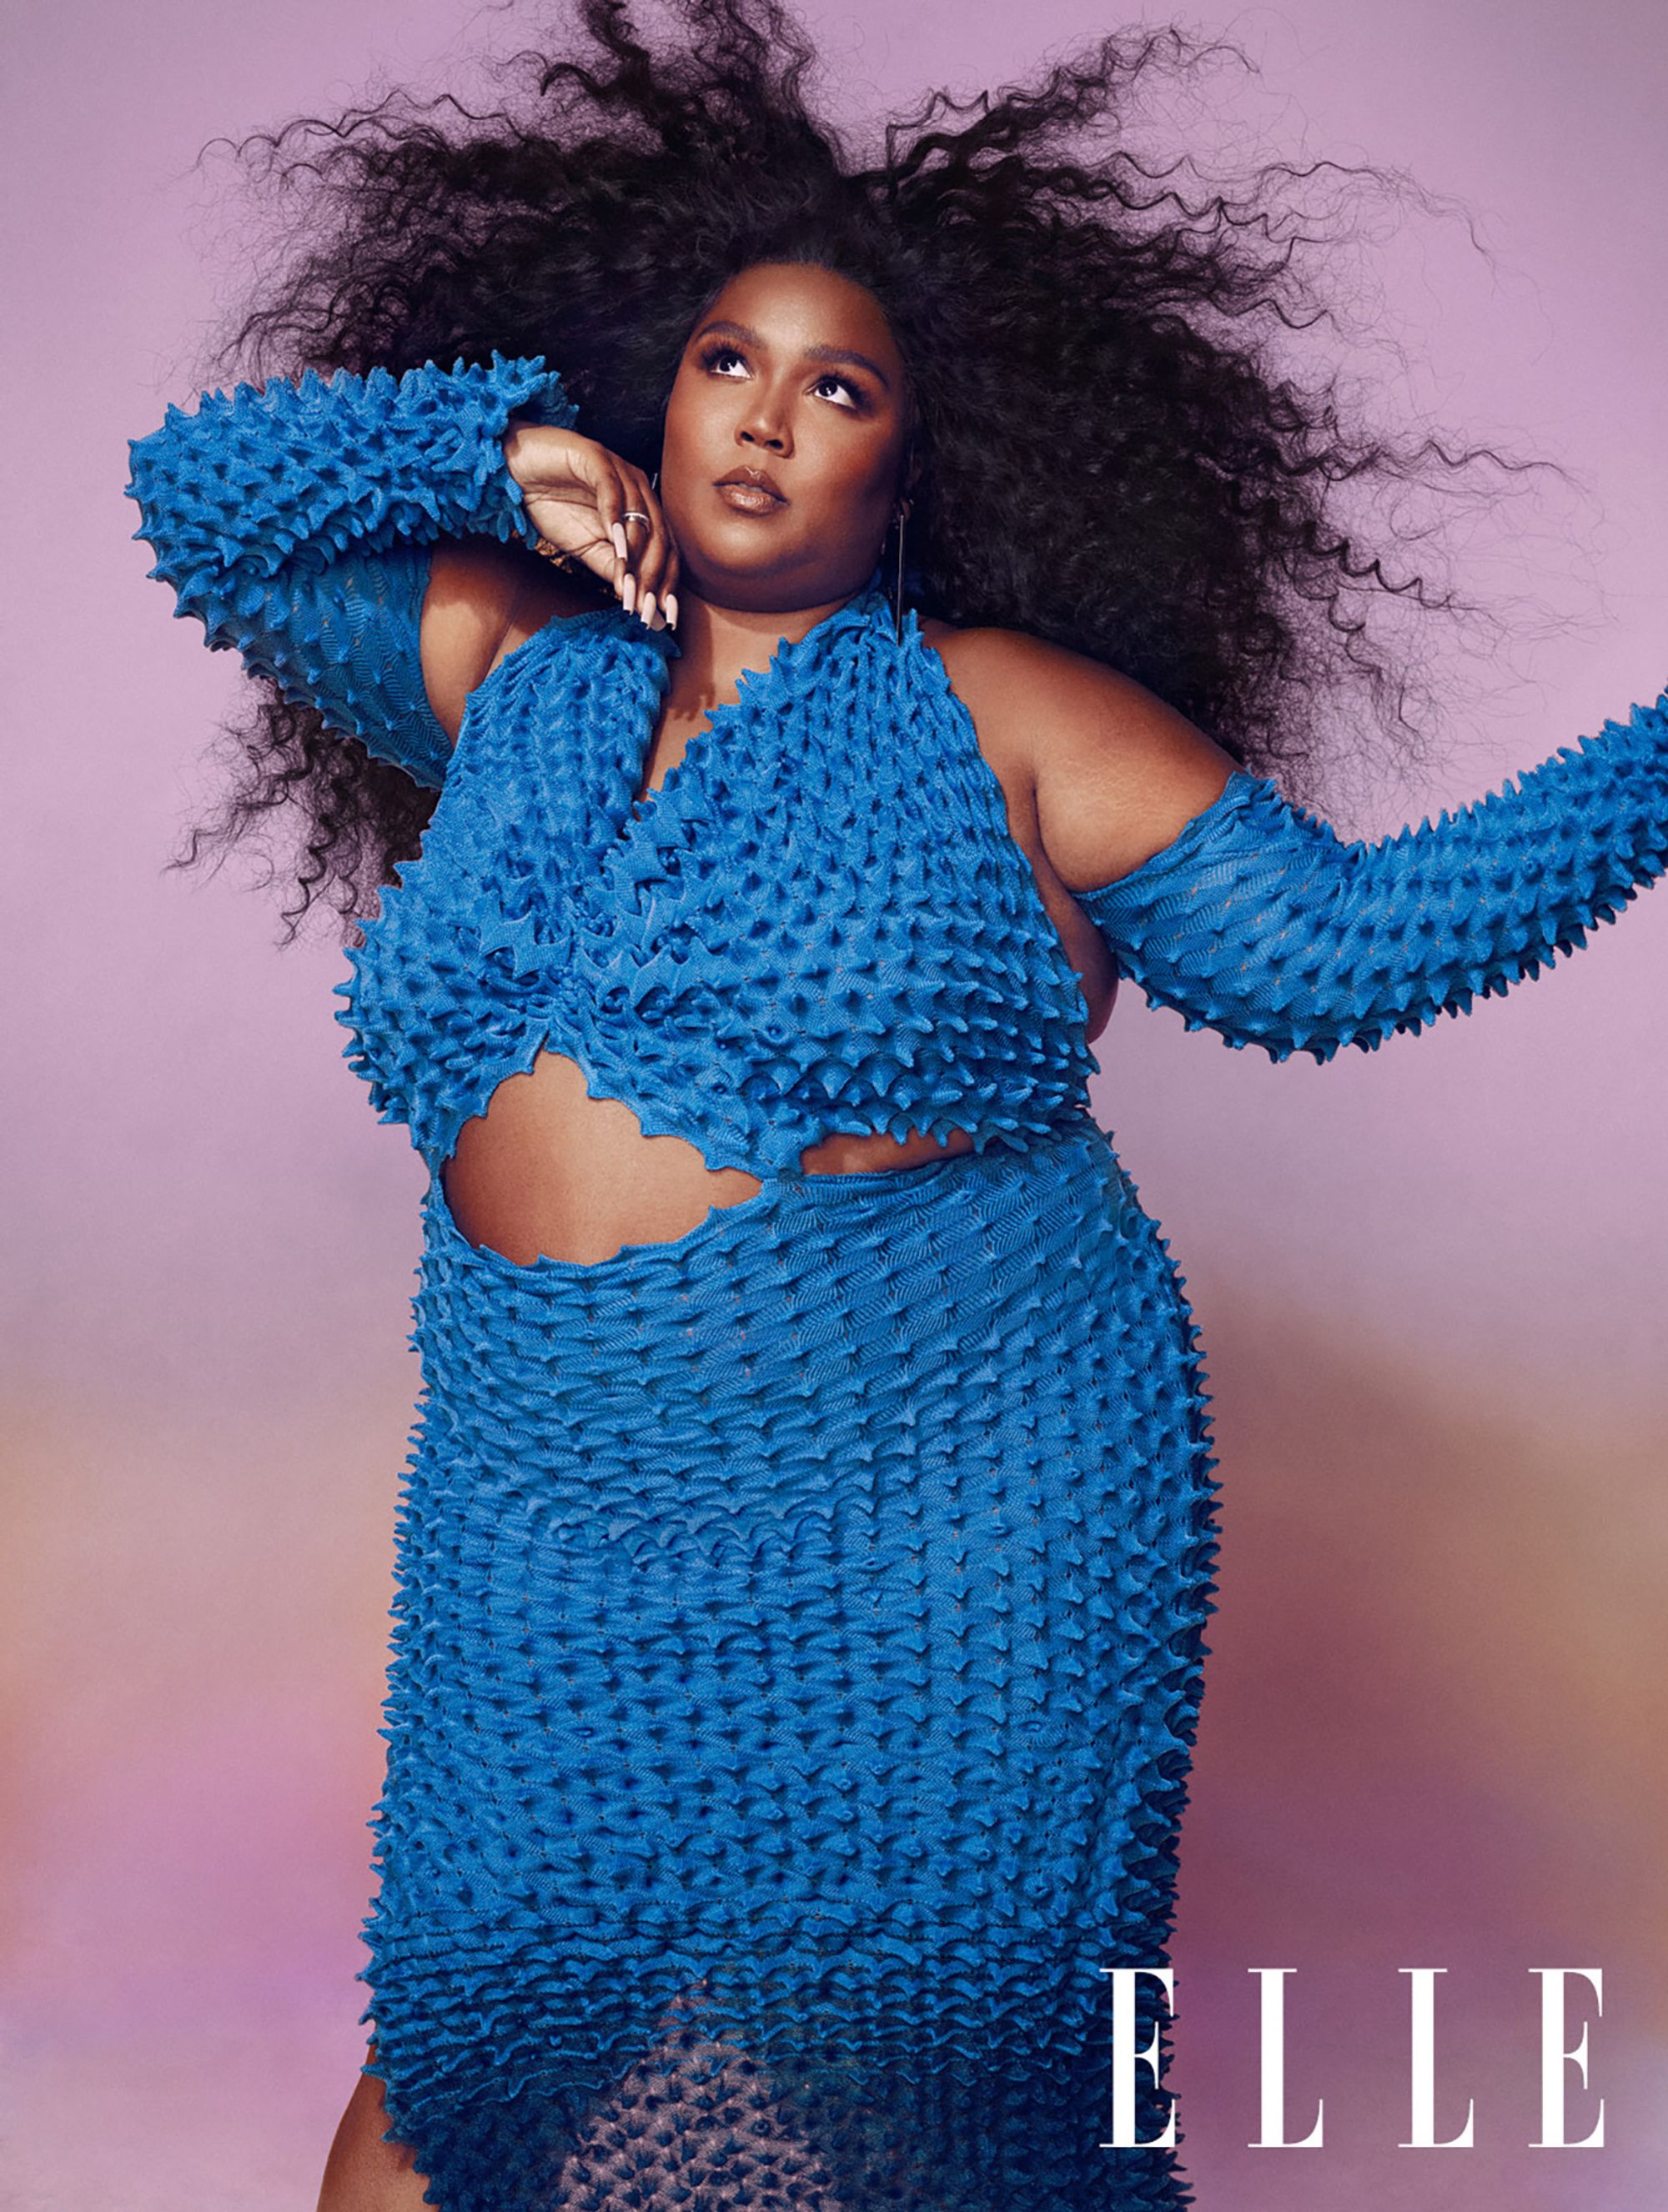 Lizzo Wants To Launch A Clothing Line